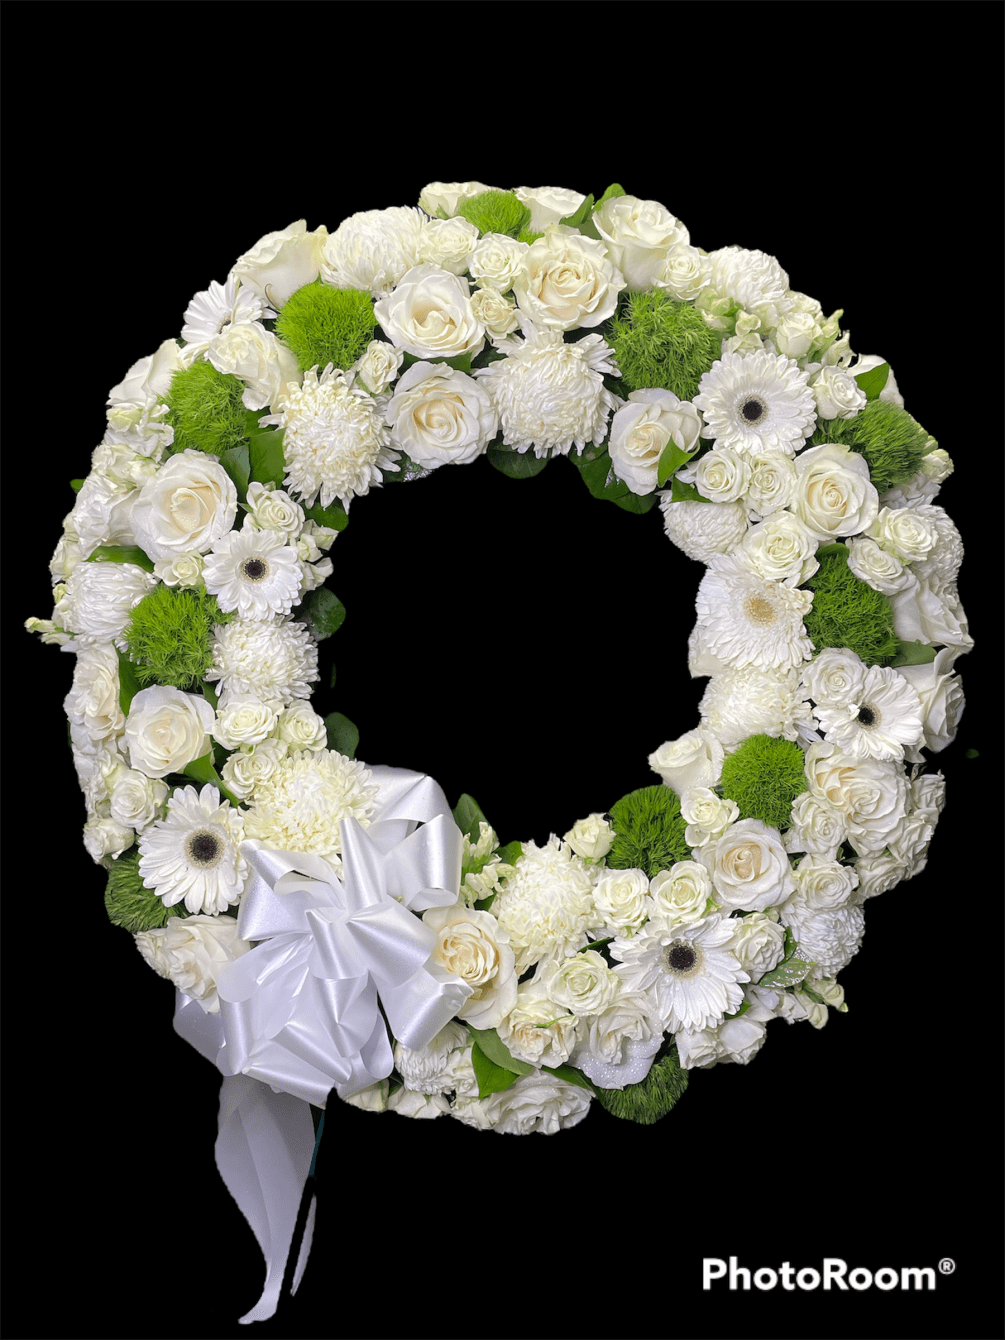 A beautiful standing  wreath with white and green flowers